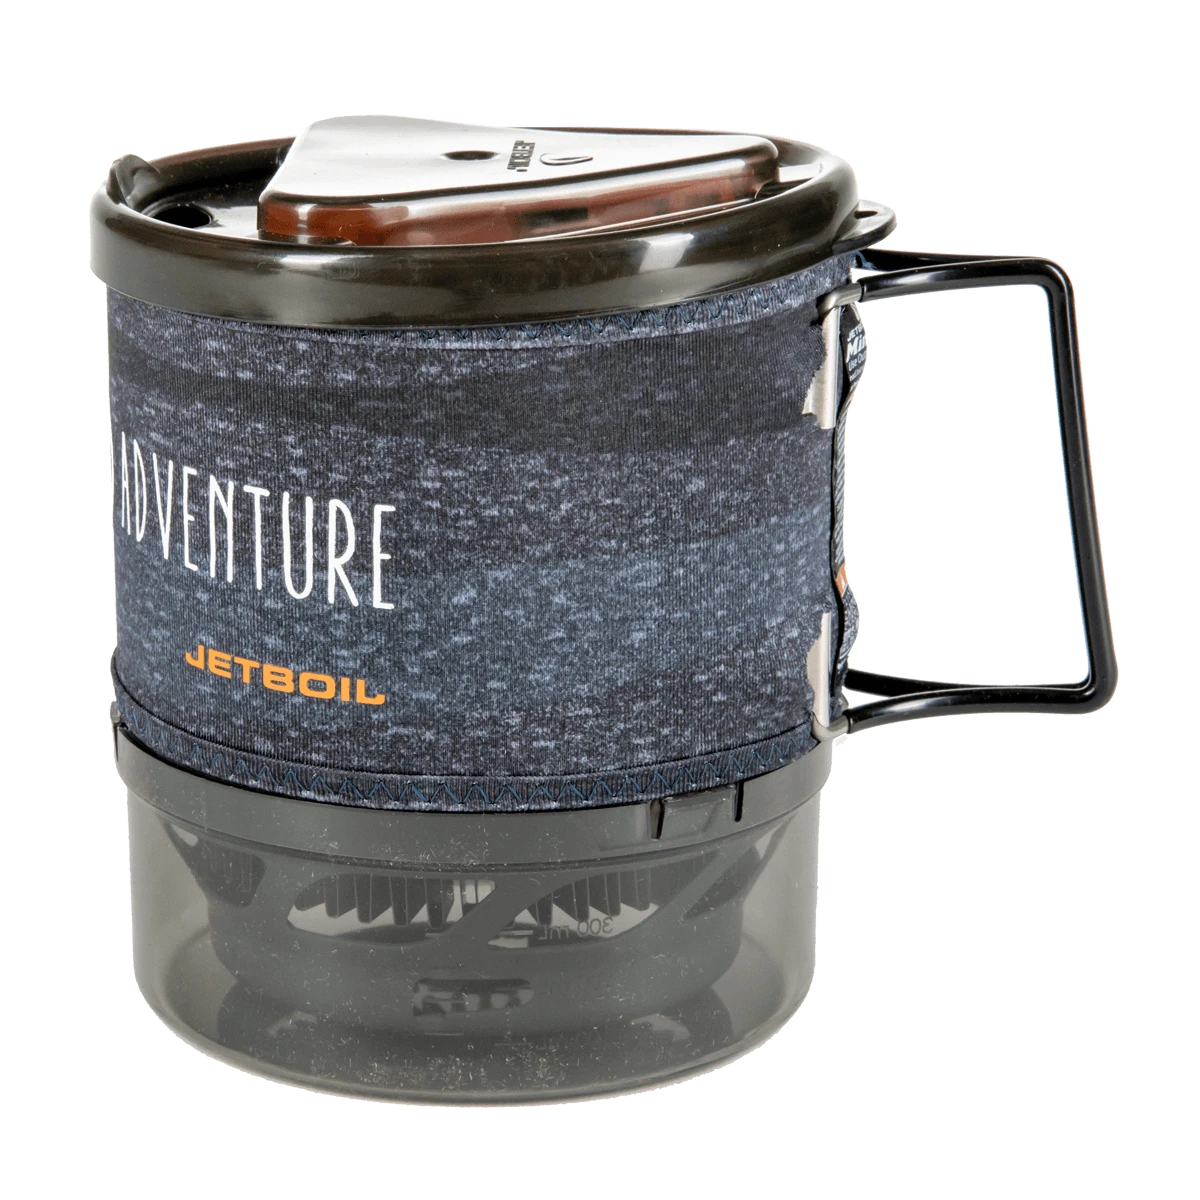 Jetboil MiniMo Camping Stove